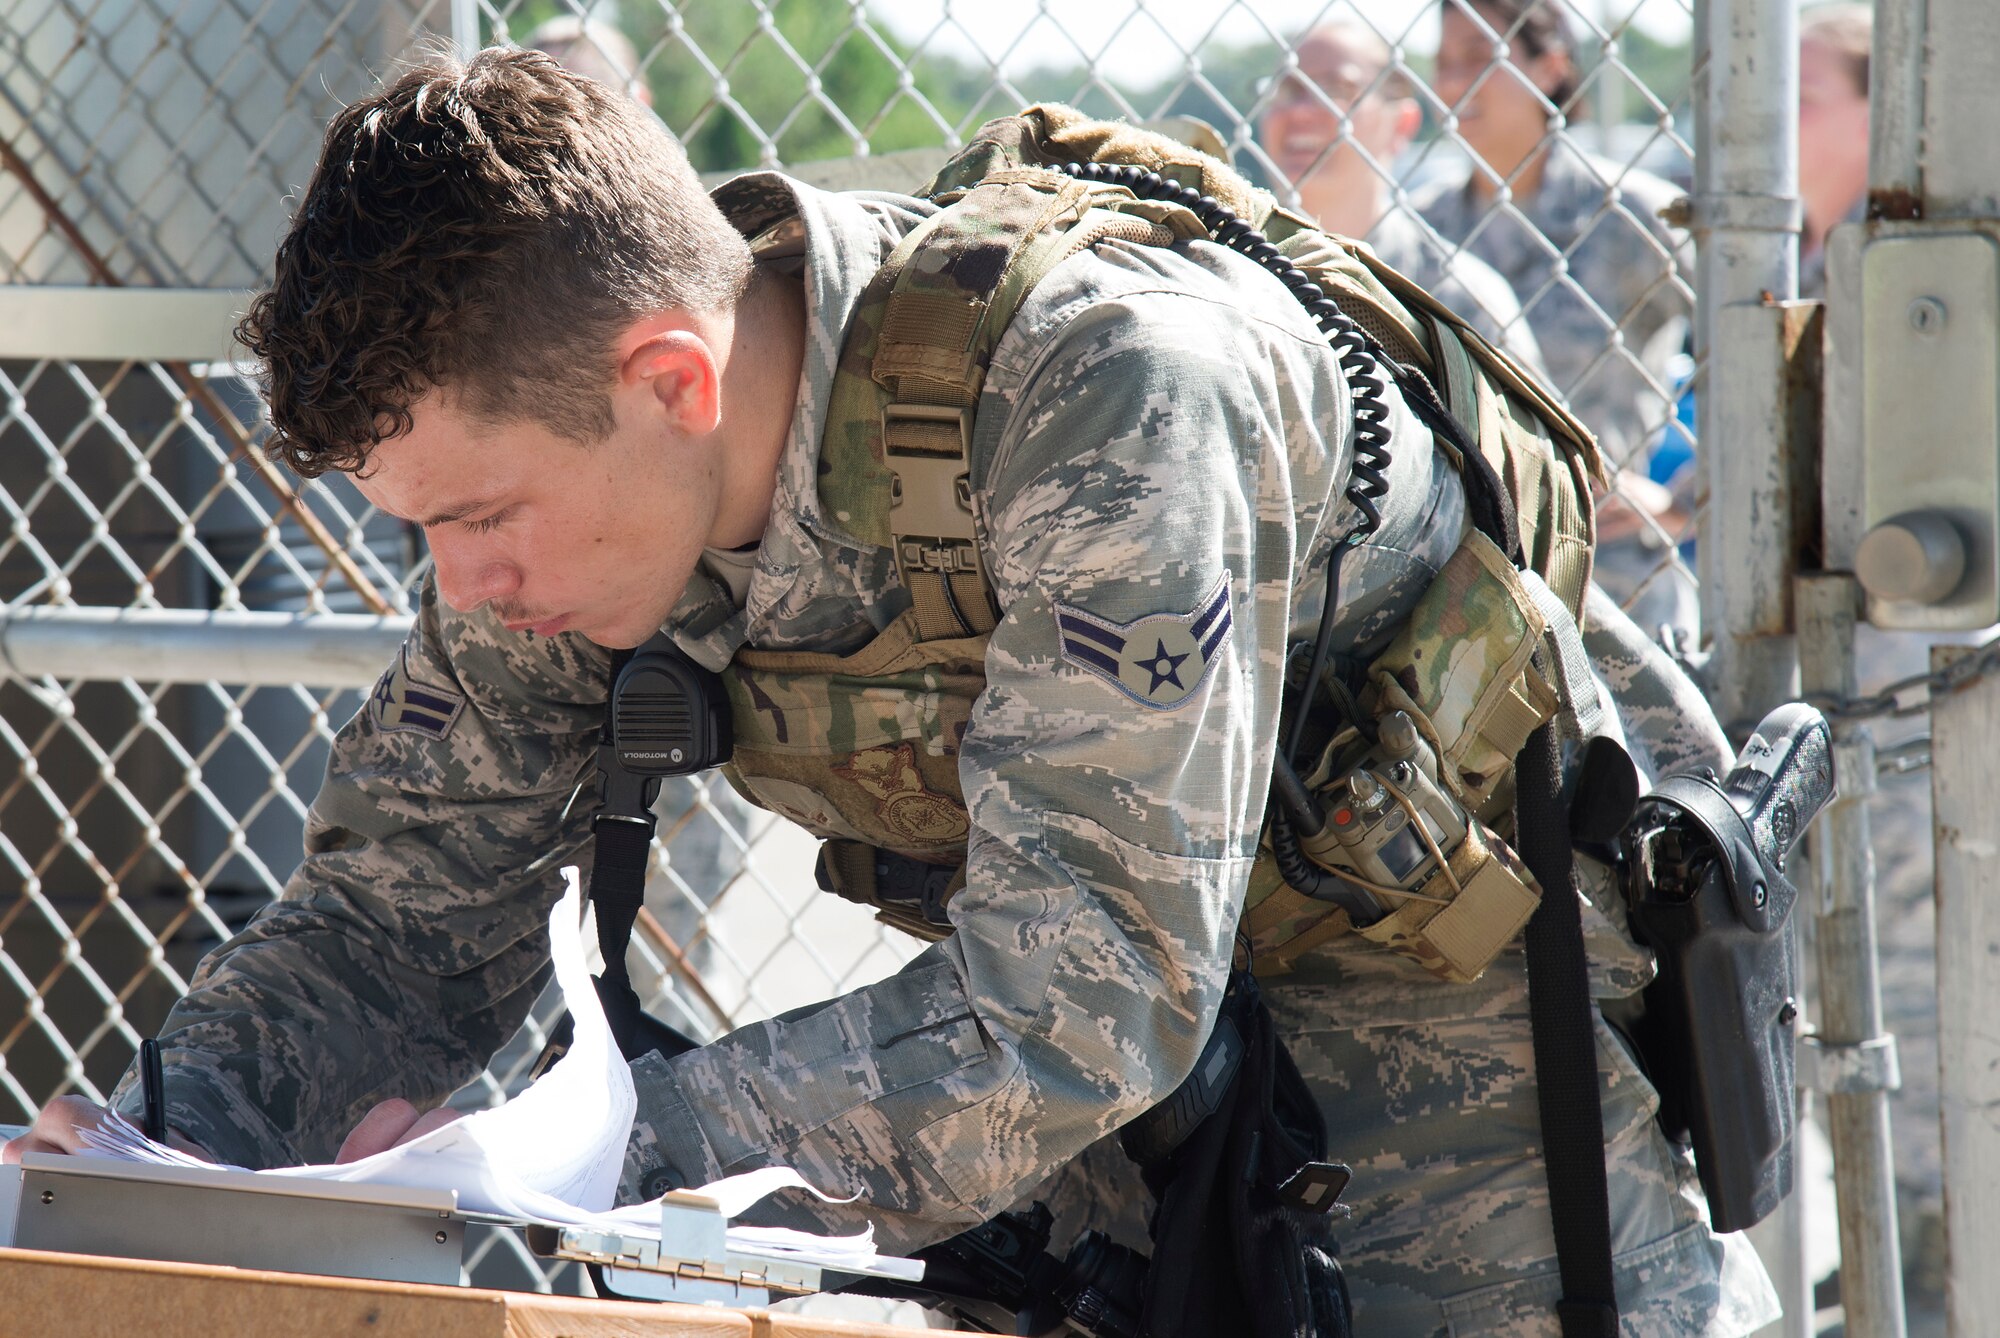 U.S. Air Force Airman 1st Class Fredric Soules, a 6th Security Forces Squadron entry controller, checks a roster during an operational readiness exercise (ORE), Oct. 22, 2019, at MacDill Air Force Base, Fla. The 6th Air Refueling Wing conducted the ORE to ensure proficiency and response times of various units on base during a simulated alert scenario.